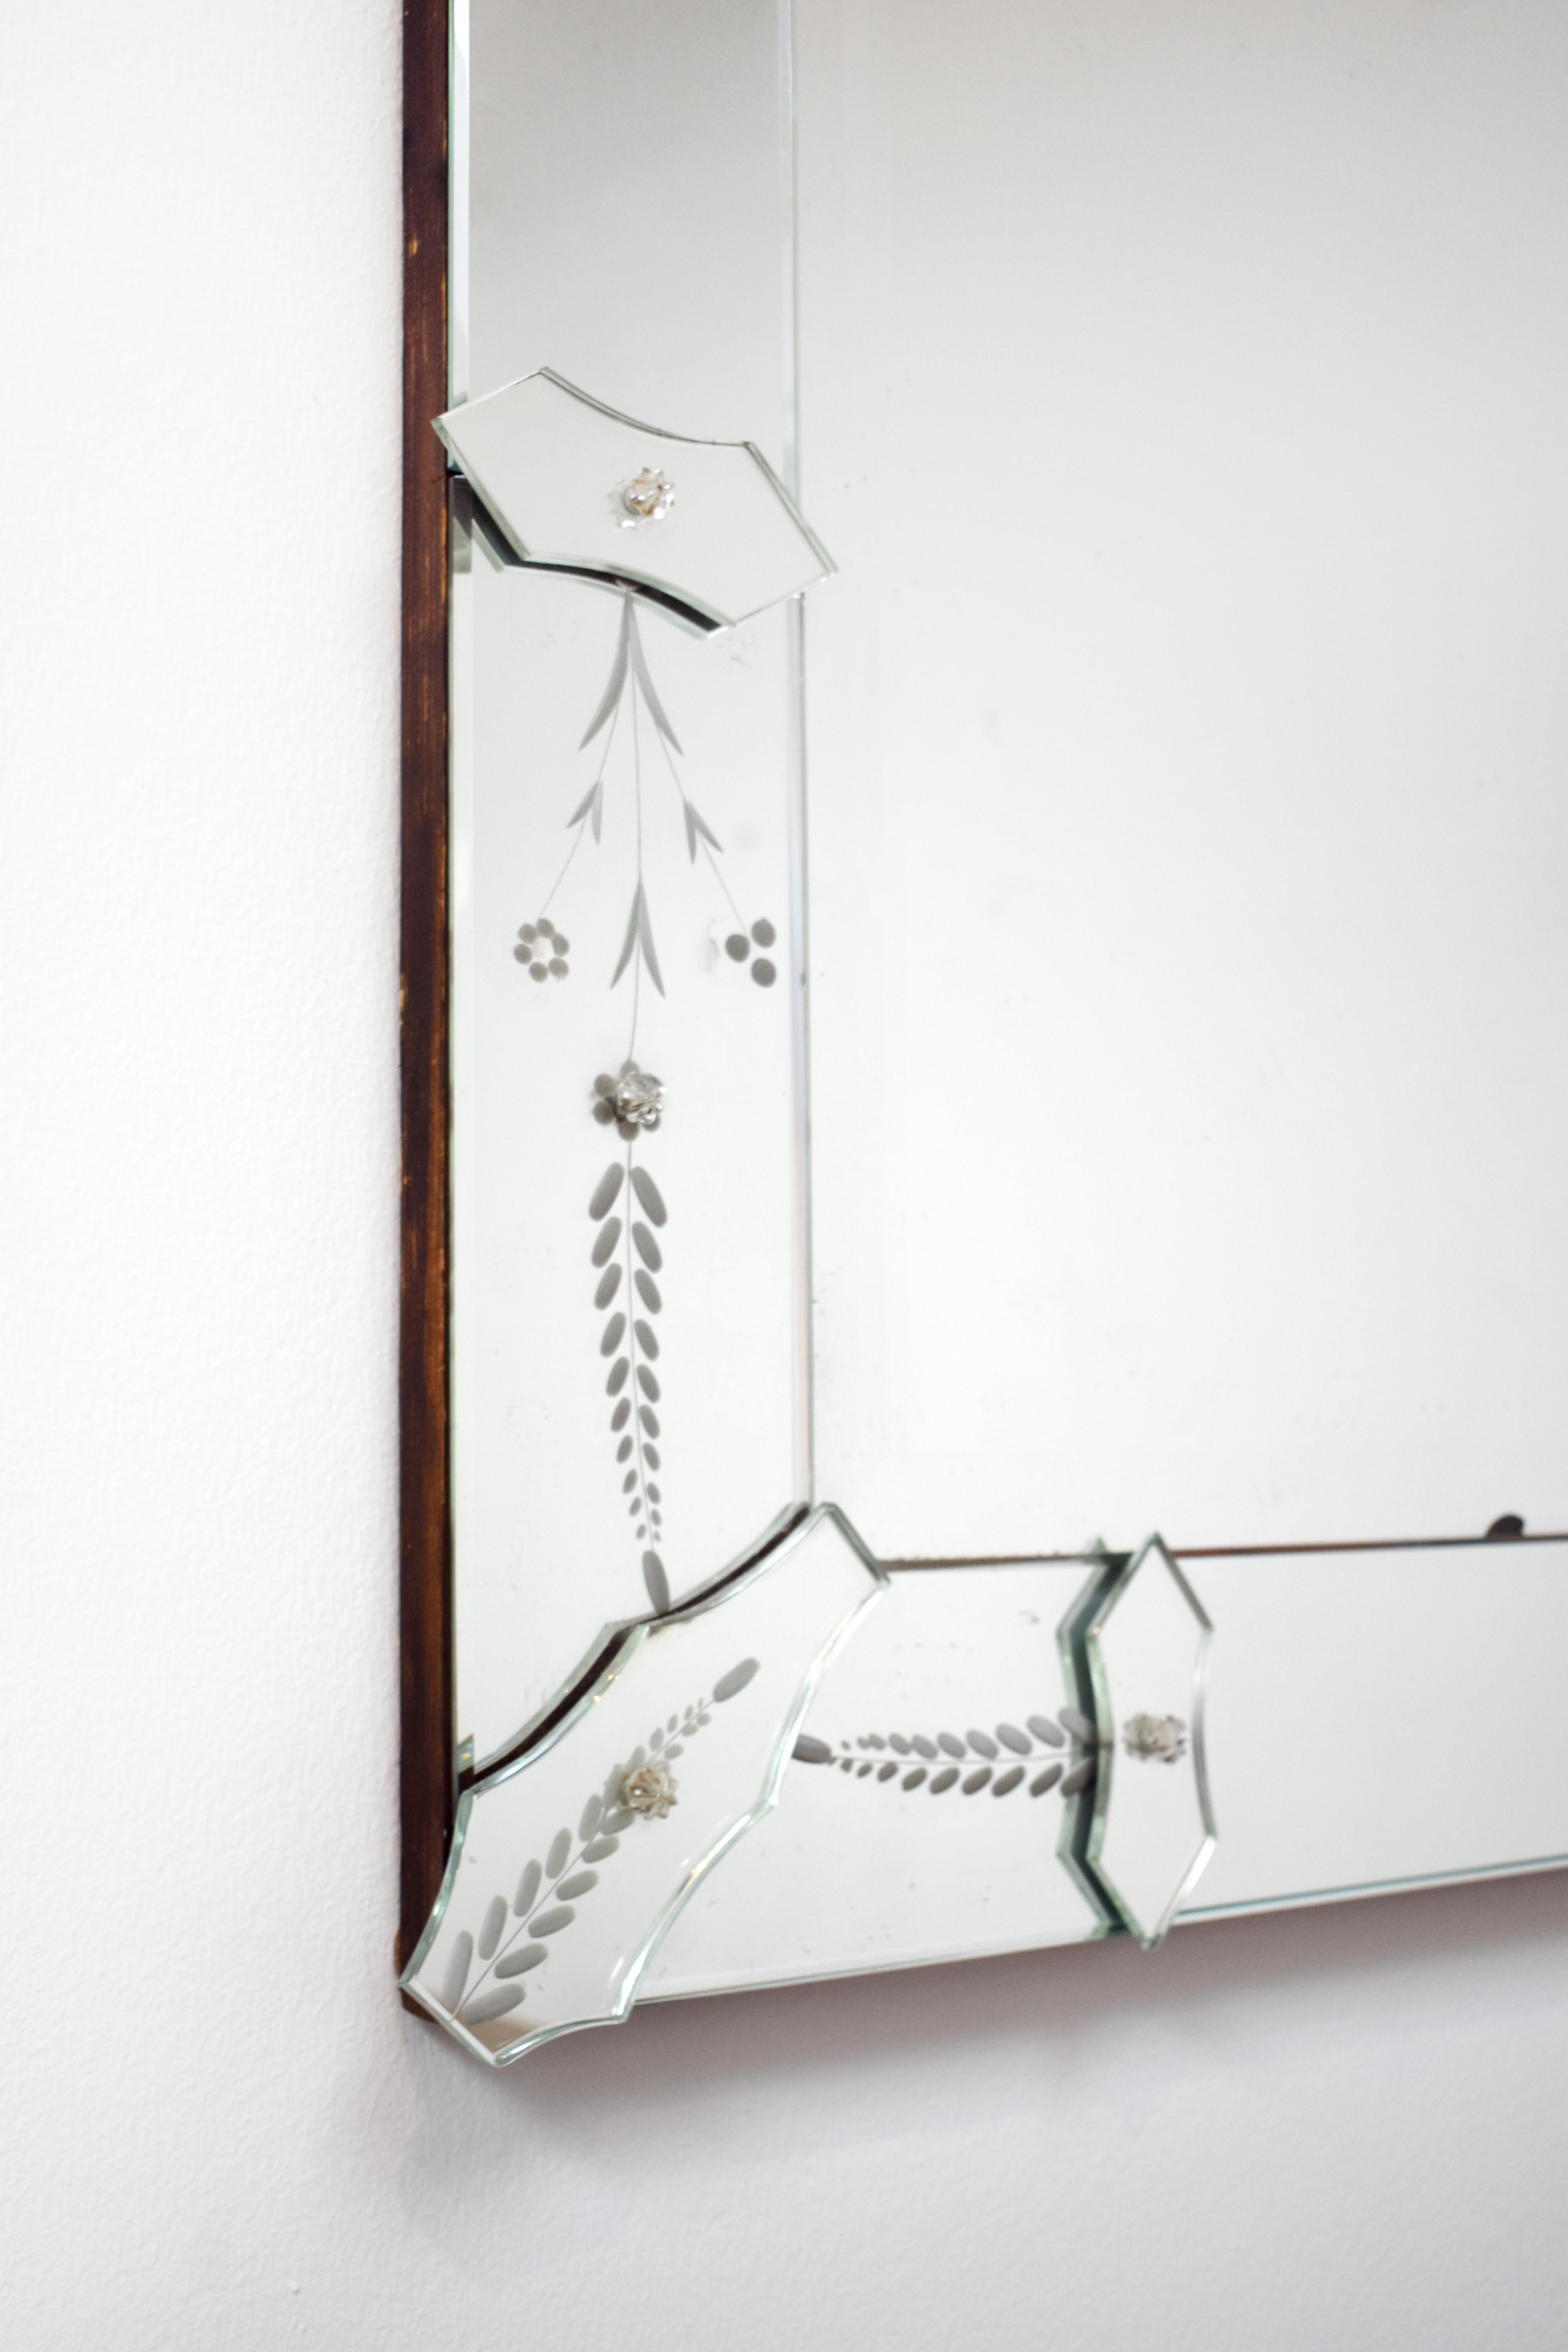 Italian Rectangular mirror in the style of Venice, the border engraved with floral decor